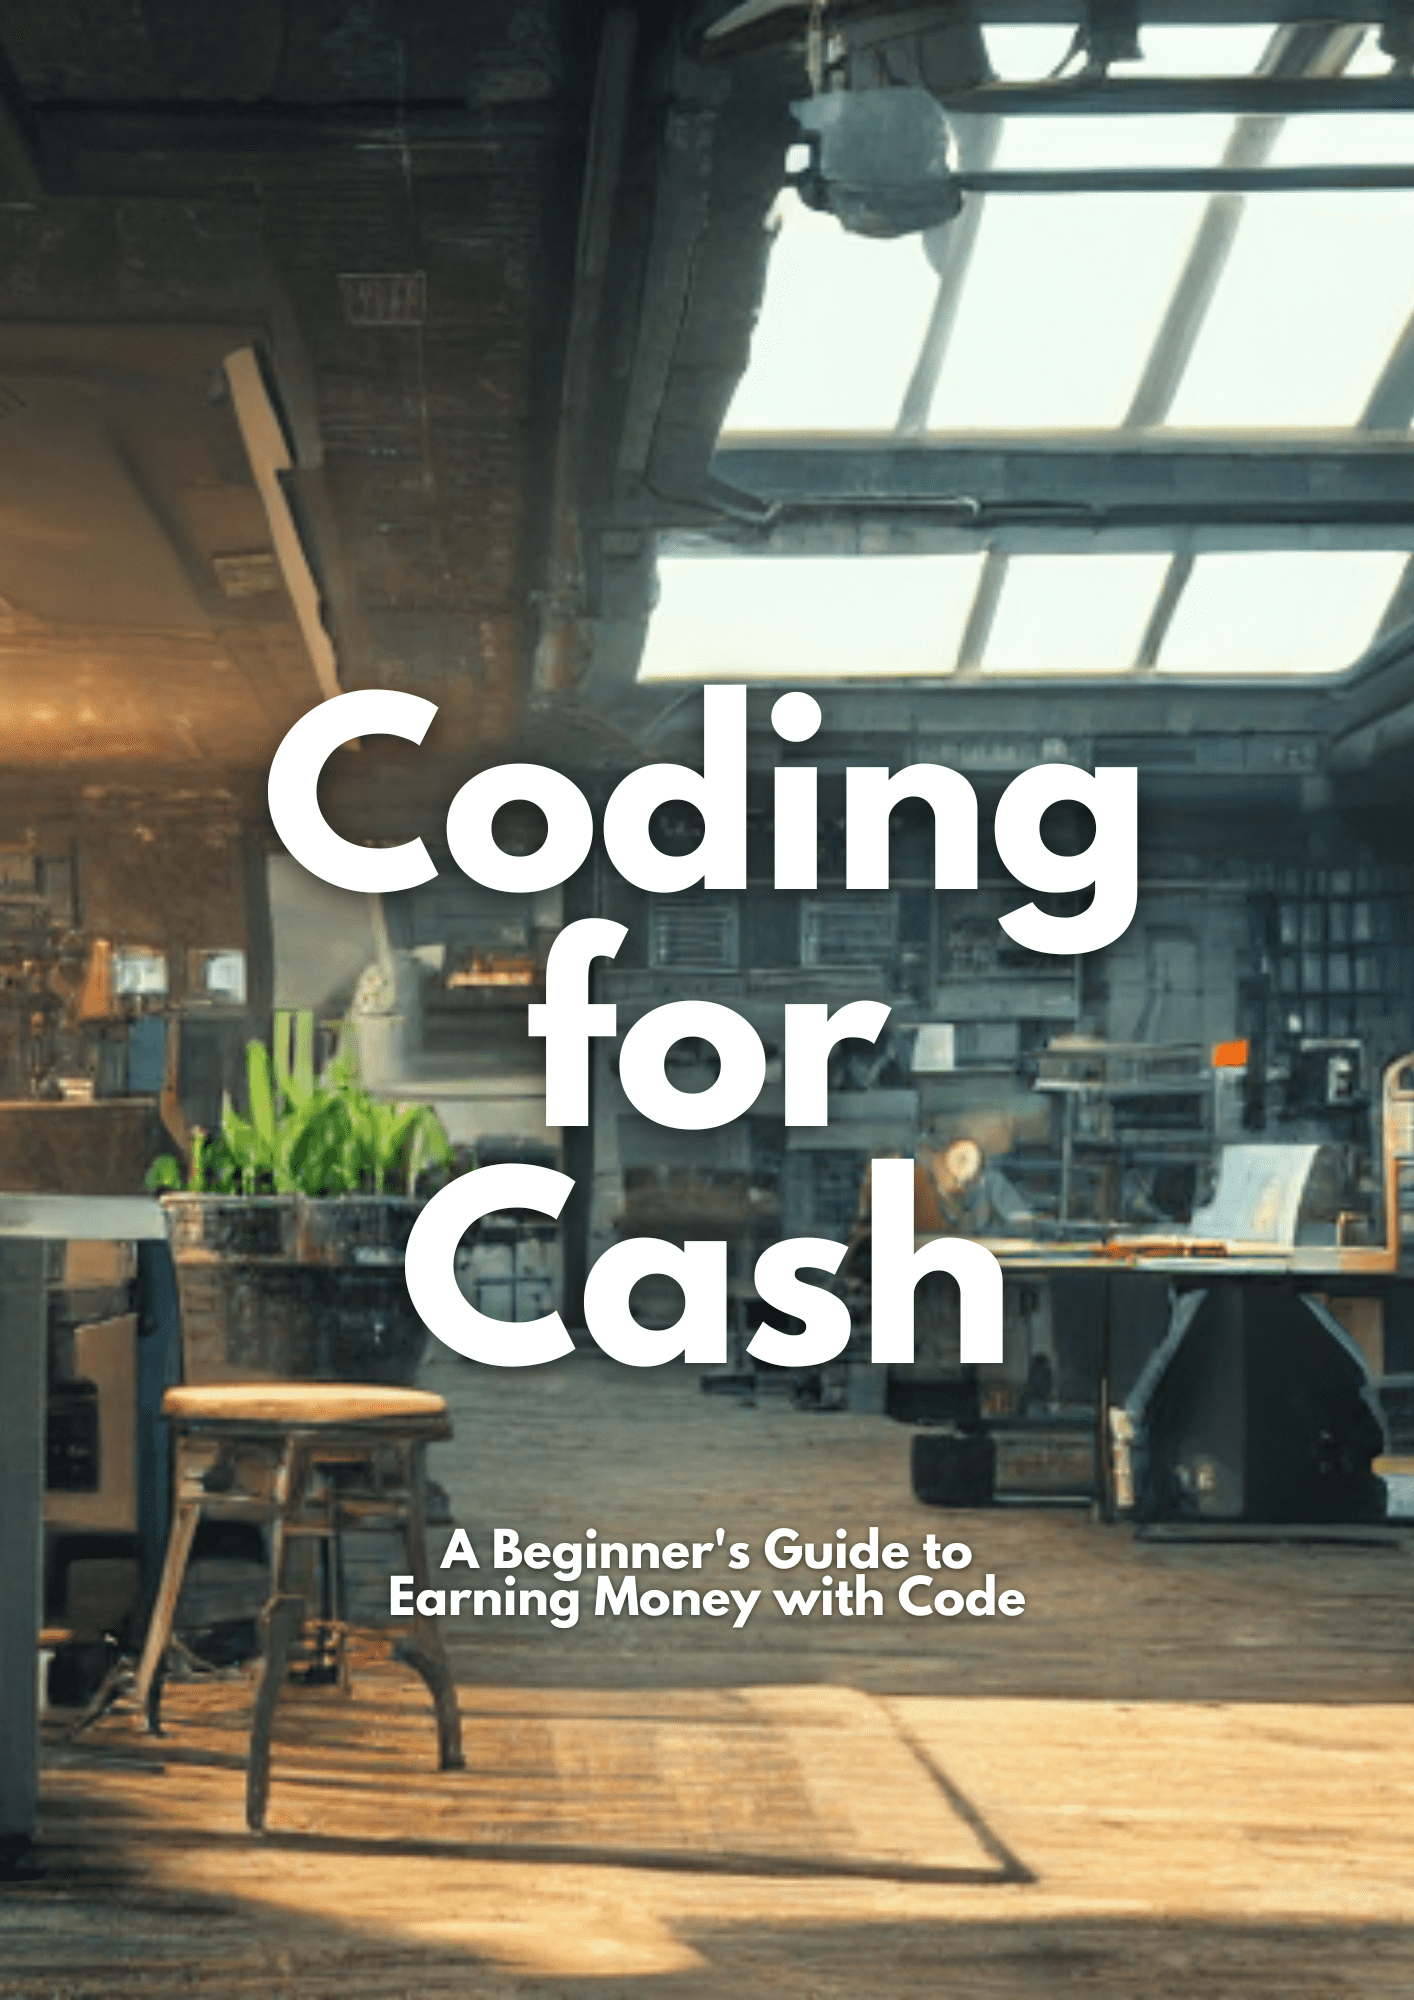 Coding for cash